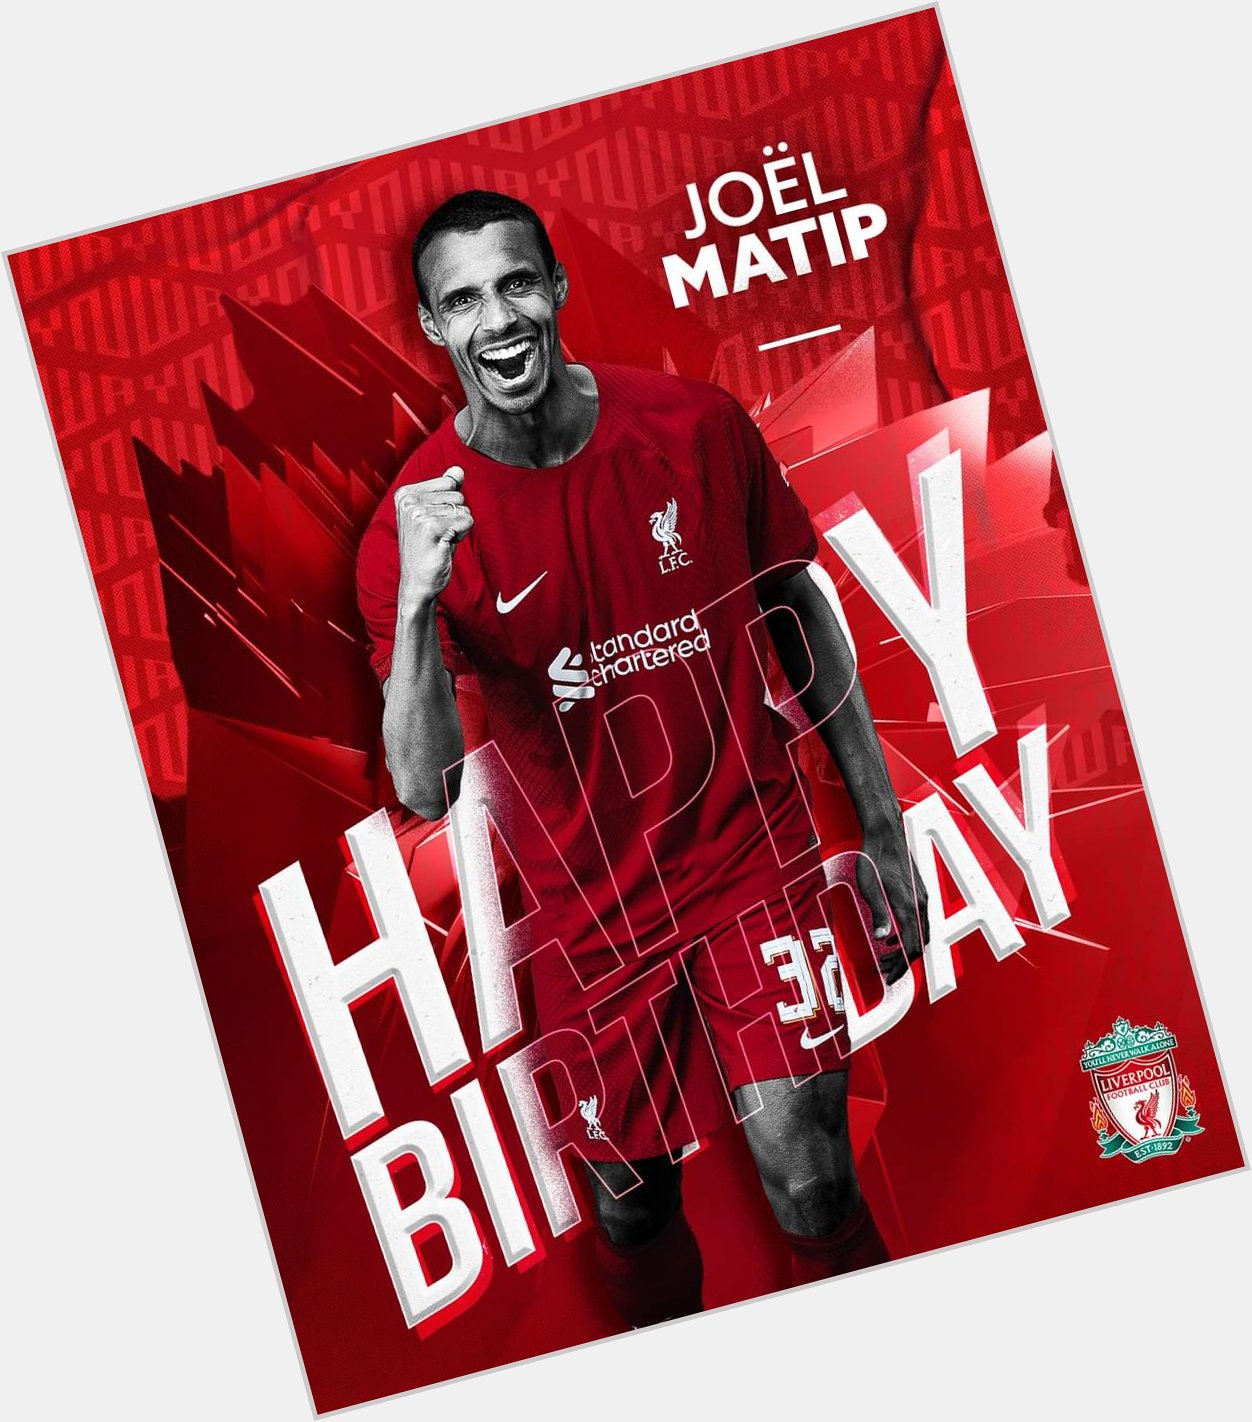 Wishing big Joel Matip a very happy birthday Leave your birthday messages for Joel below   